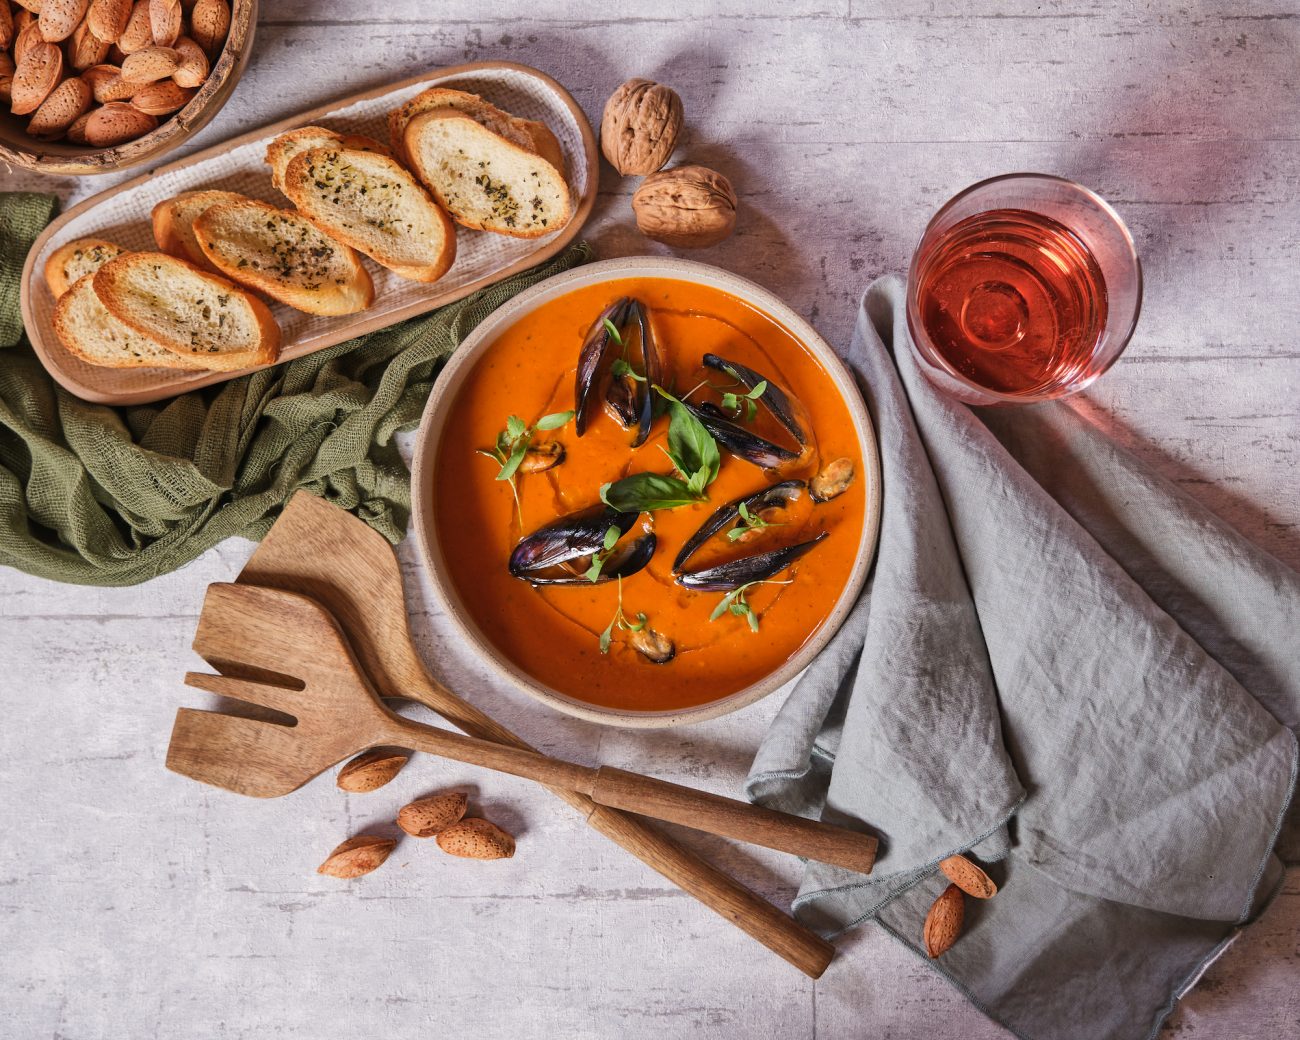 Tomato Soup with Black Shell Mussels and Herbs